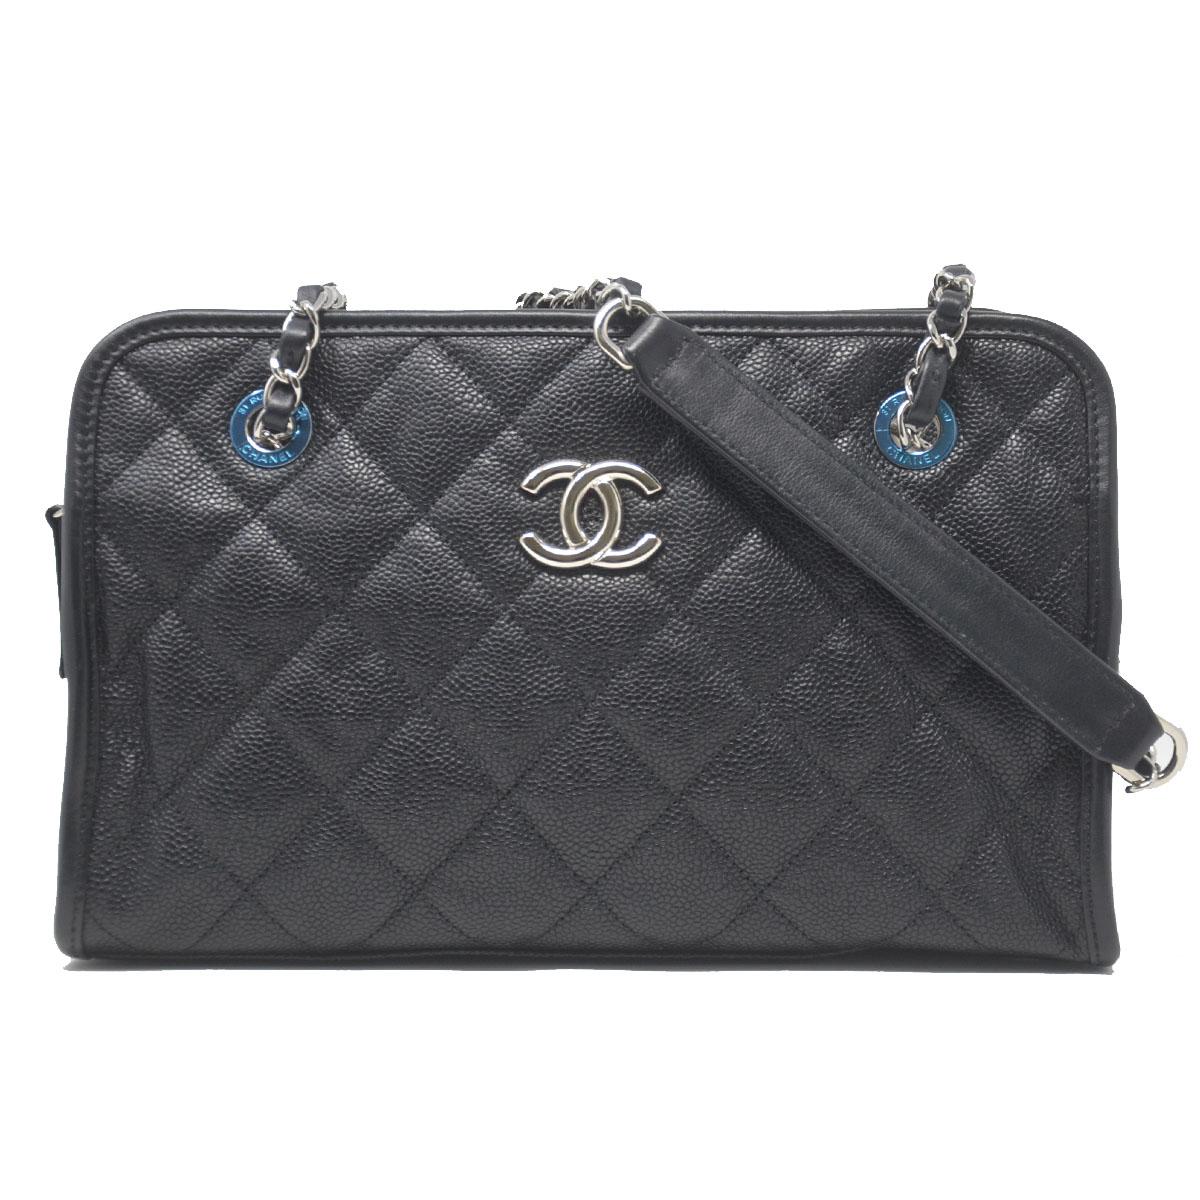 Company-Chanel
Model-Caviar
Color-Black
Date Code-17676154
Material-Leather
Measurements-10.5